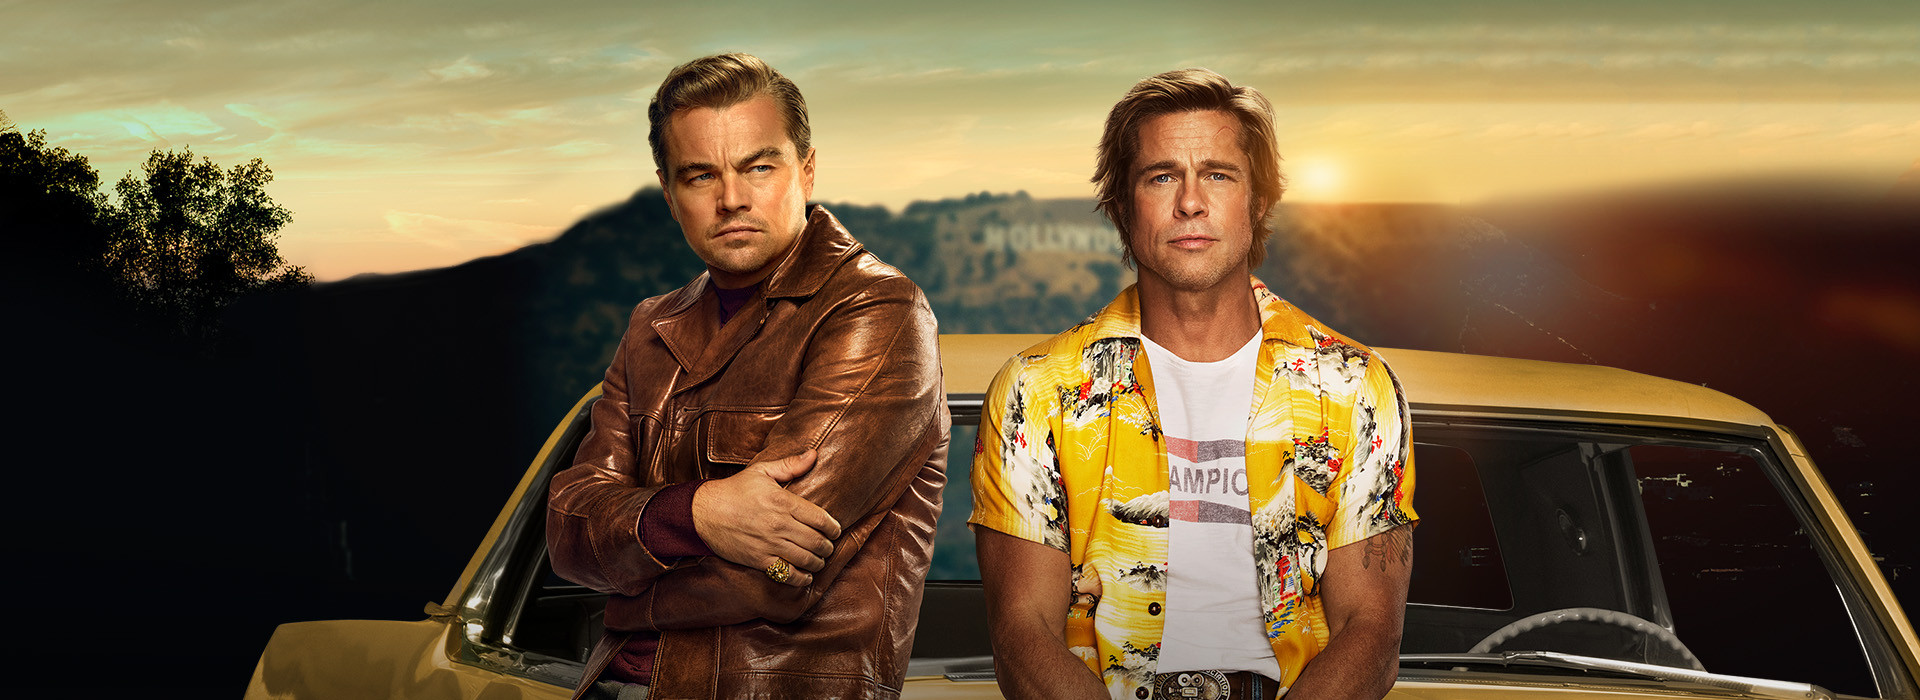 Movie poster Once Upon a Time in Hollywood